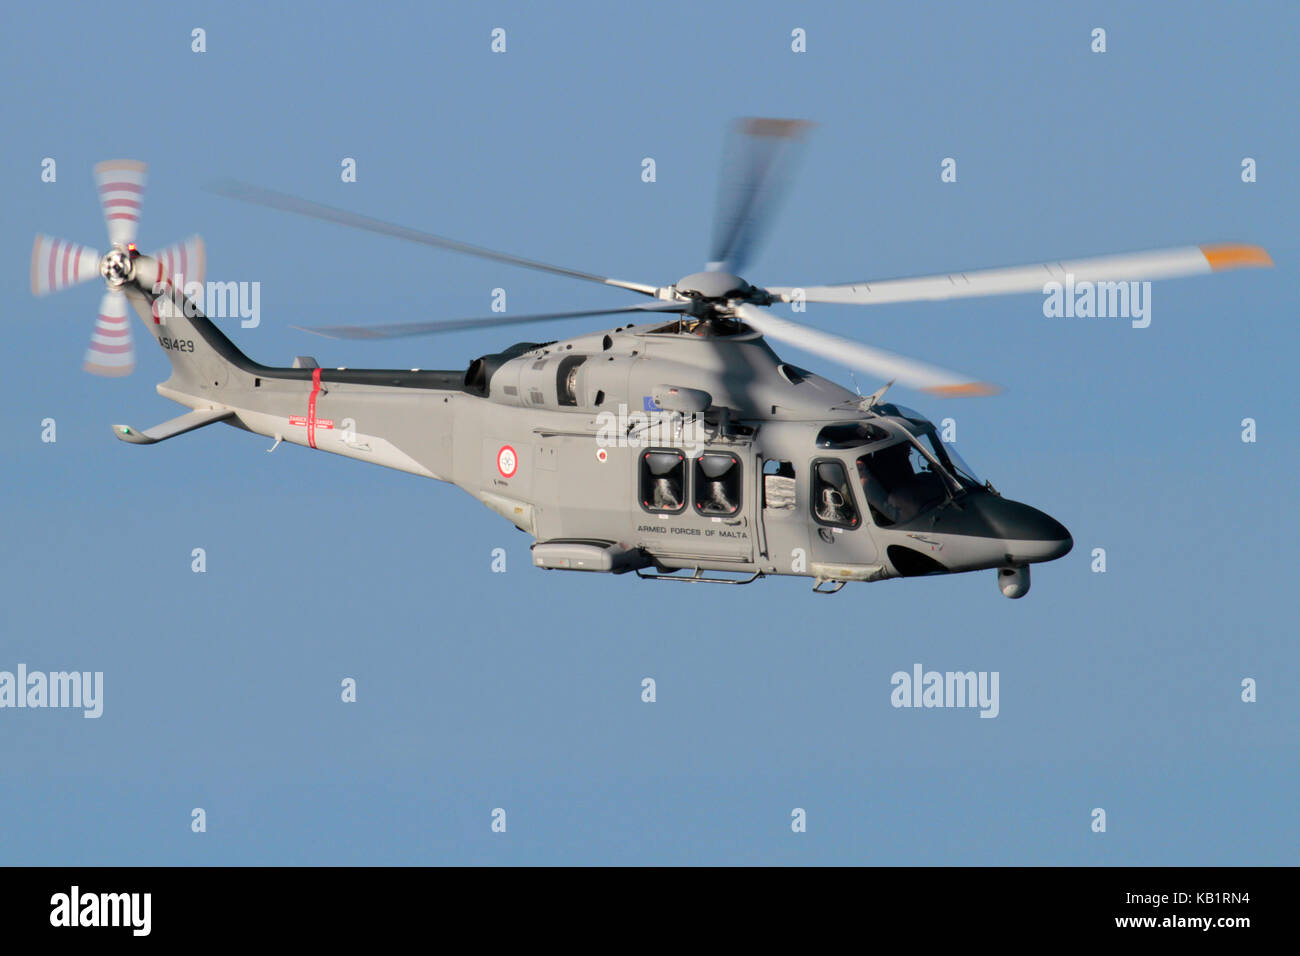 Helicopter flying in the air. AgustaWestland AW139 maritime patrol and search and rescue aircraft of the Armed Forces of Malta against a blue sky. Stock Photo